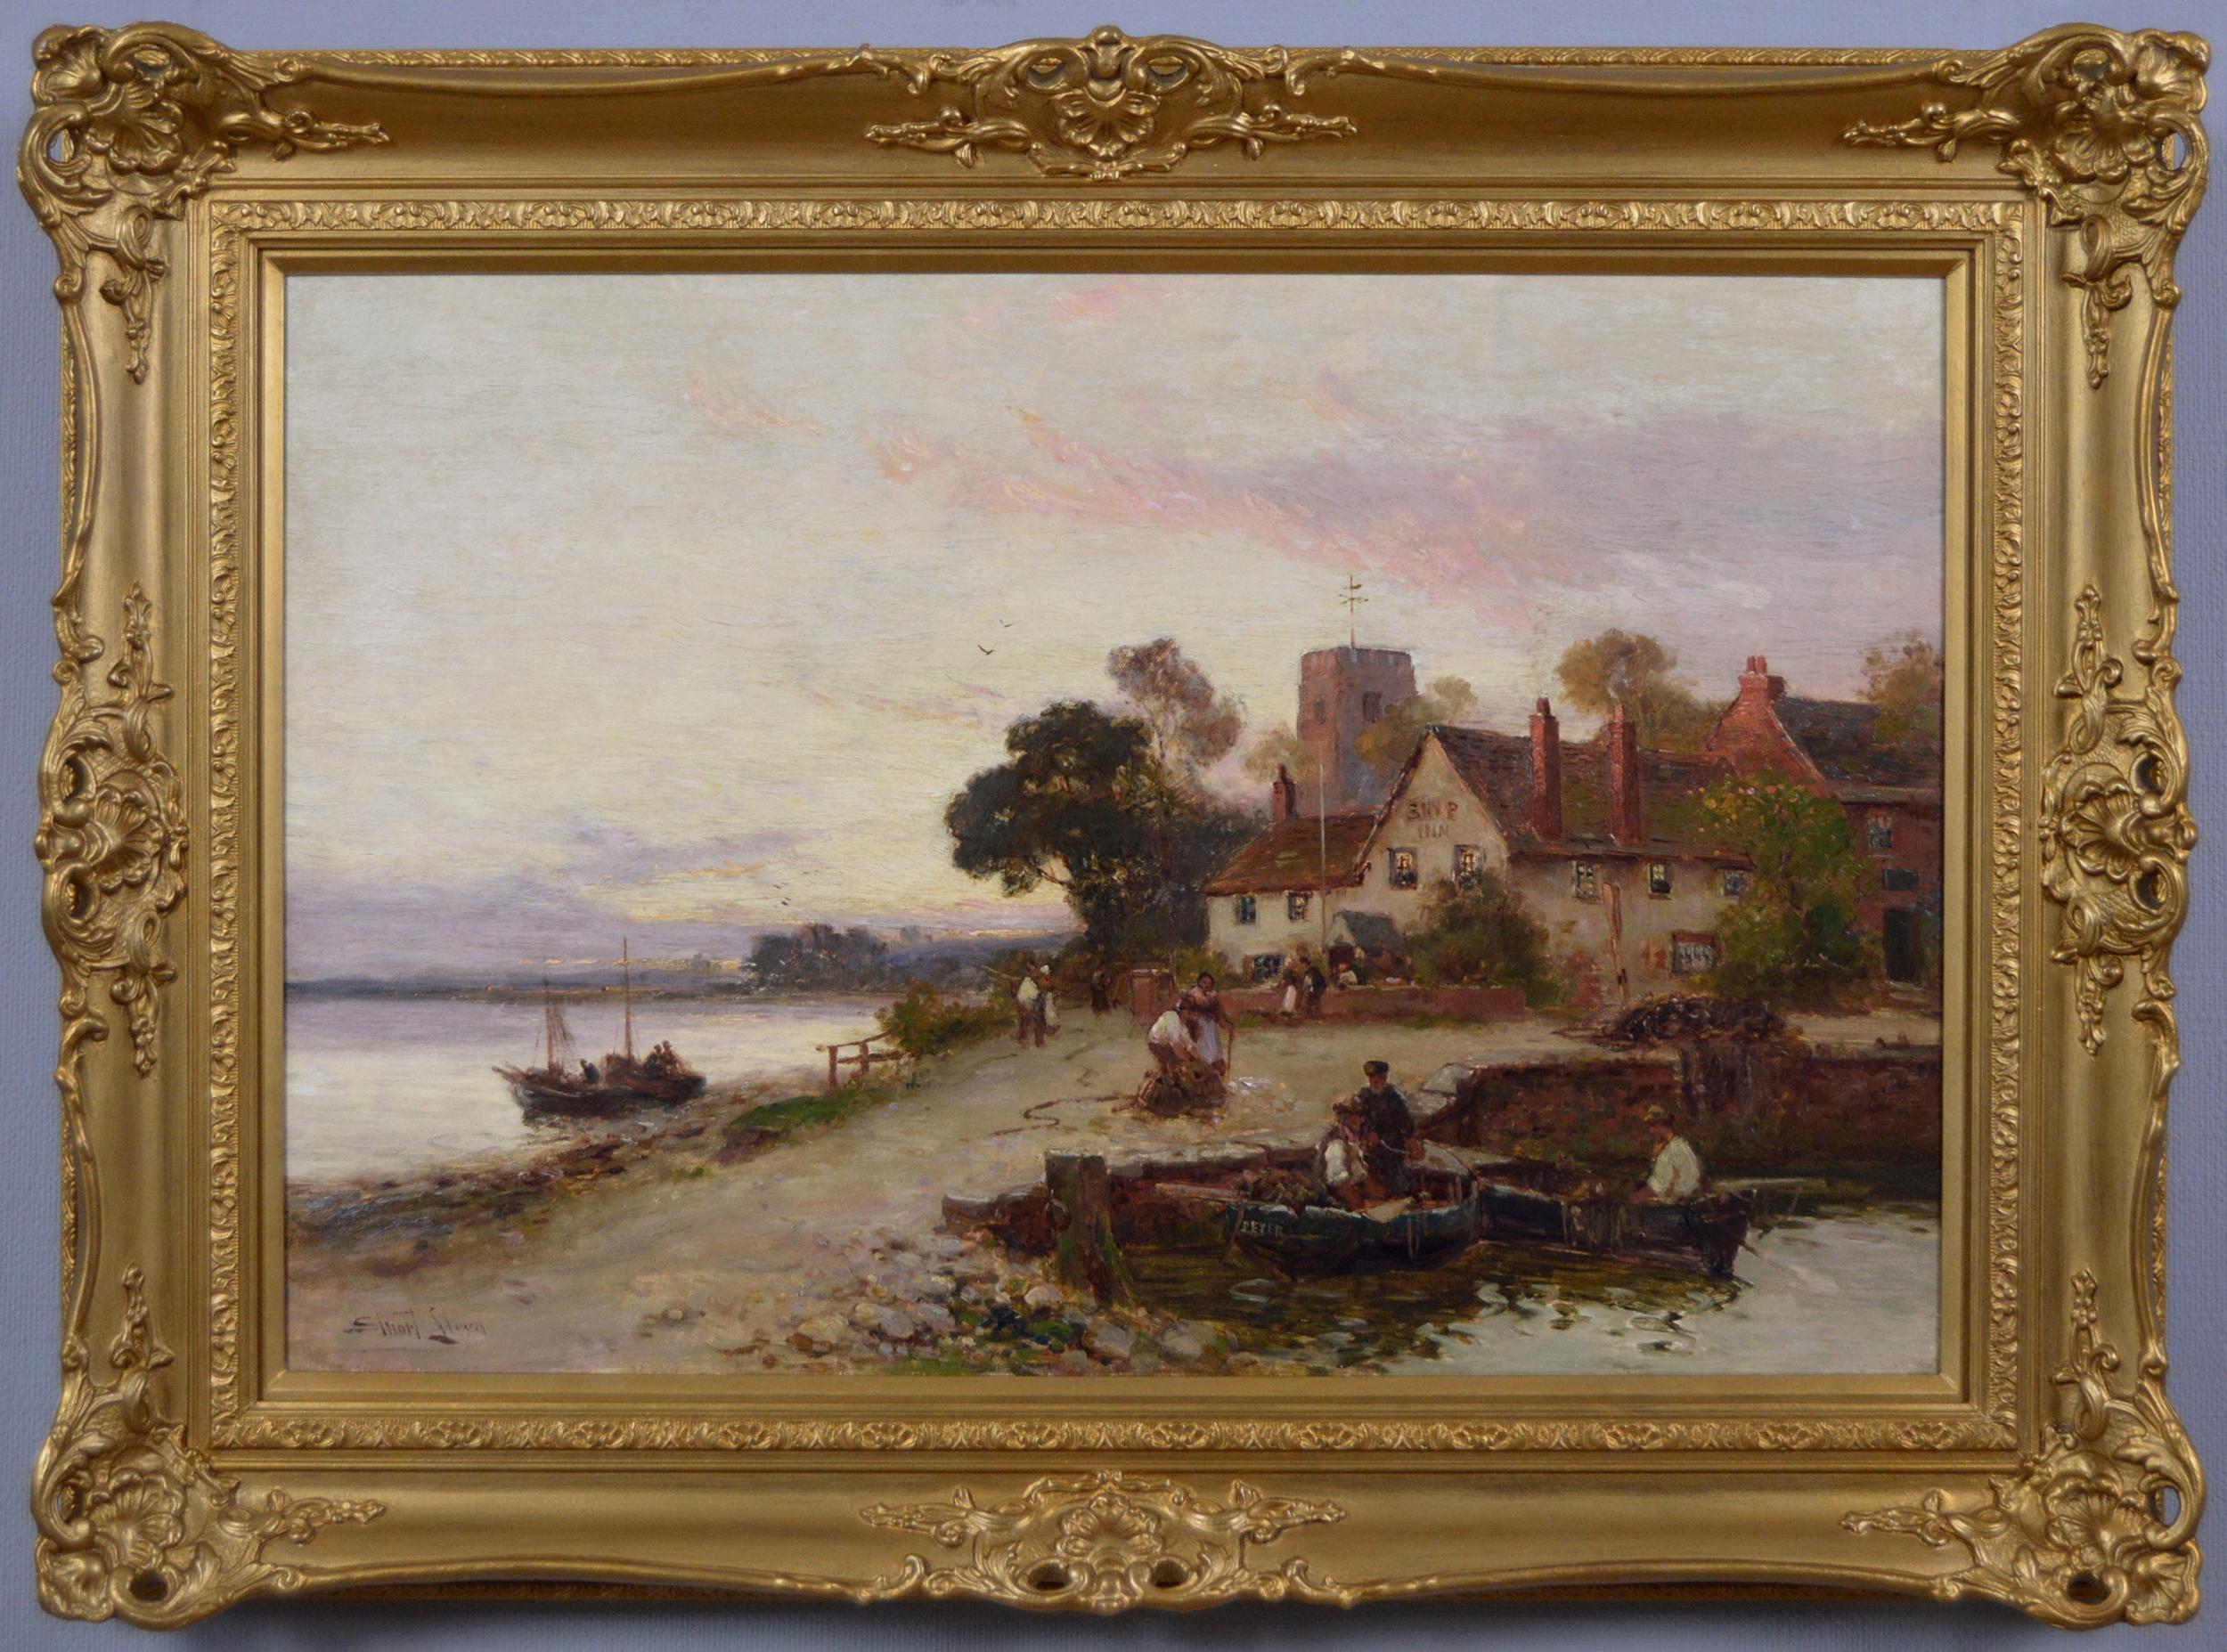 Walter Stuart Lloyd Landscape Painting - 19th Century river landscape oil painting of an Inn by a river 